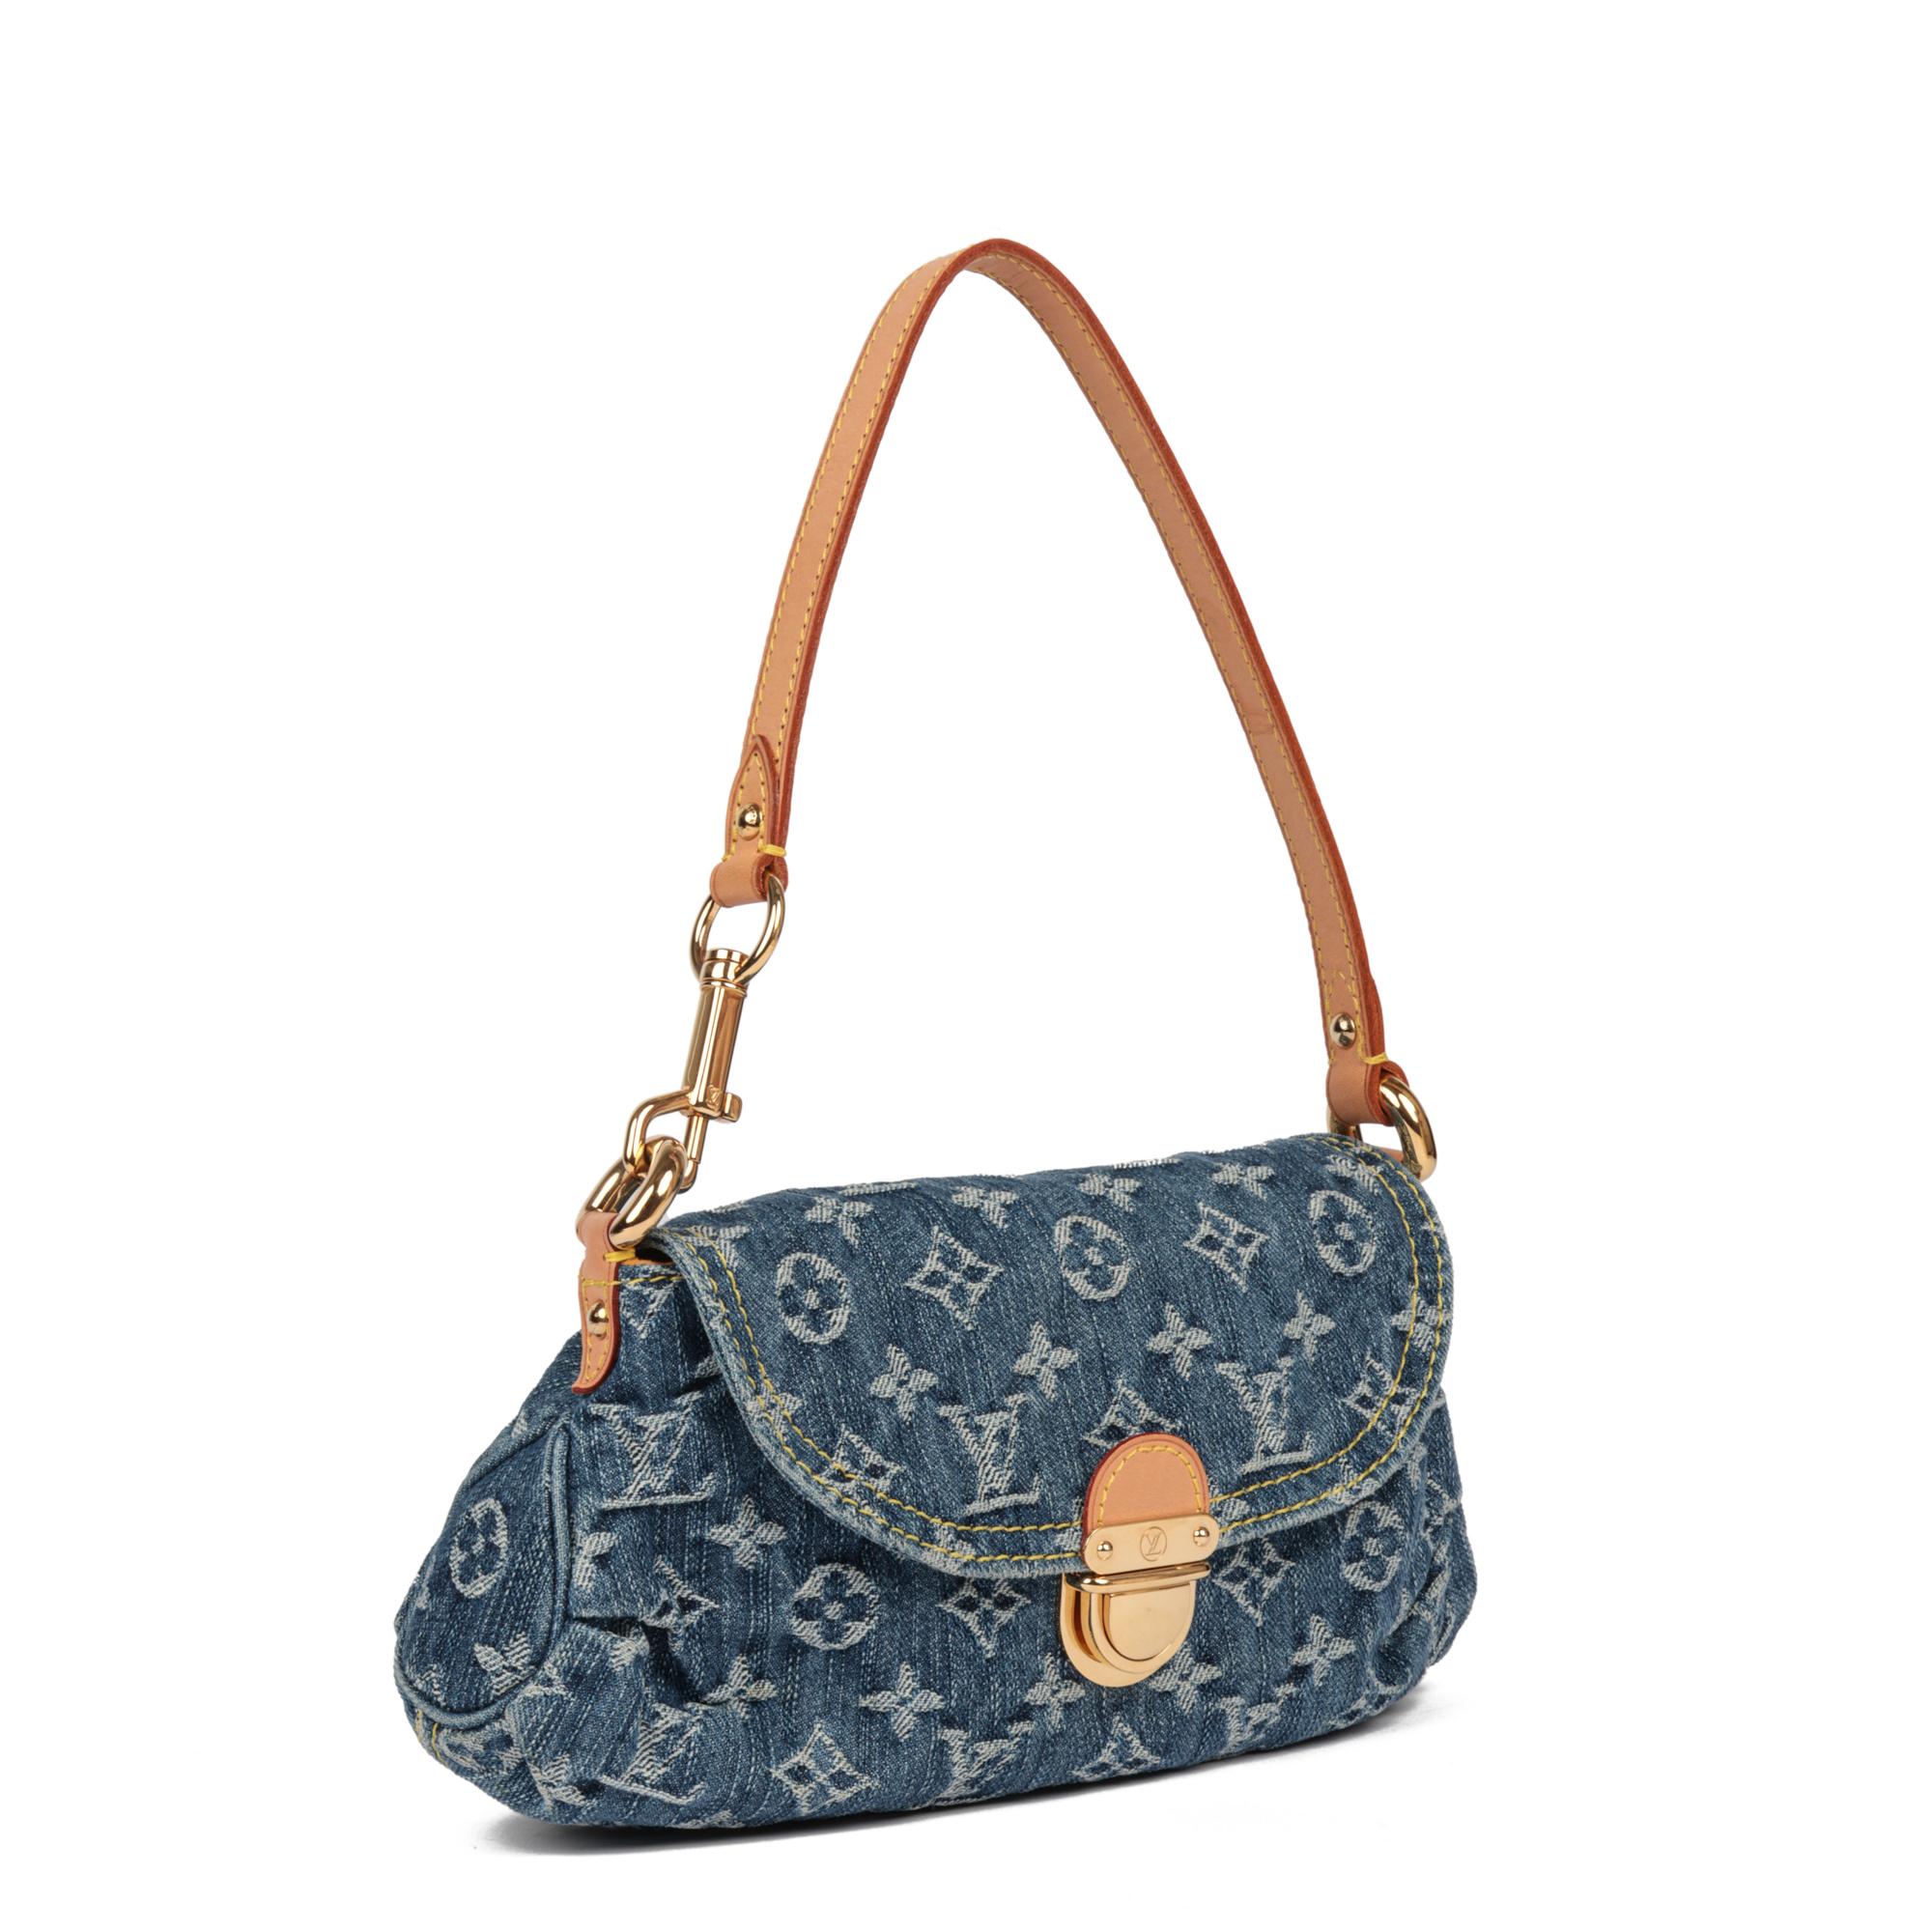 Louis Vuitton Blue Monogram Denim and Vachetta Leather Mini Pleaty

CONDITION NOTES
The exterior is in excellent condition with light signs of use.
The interior is in very good condition with light signs of use. There are pen marks on the yellow